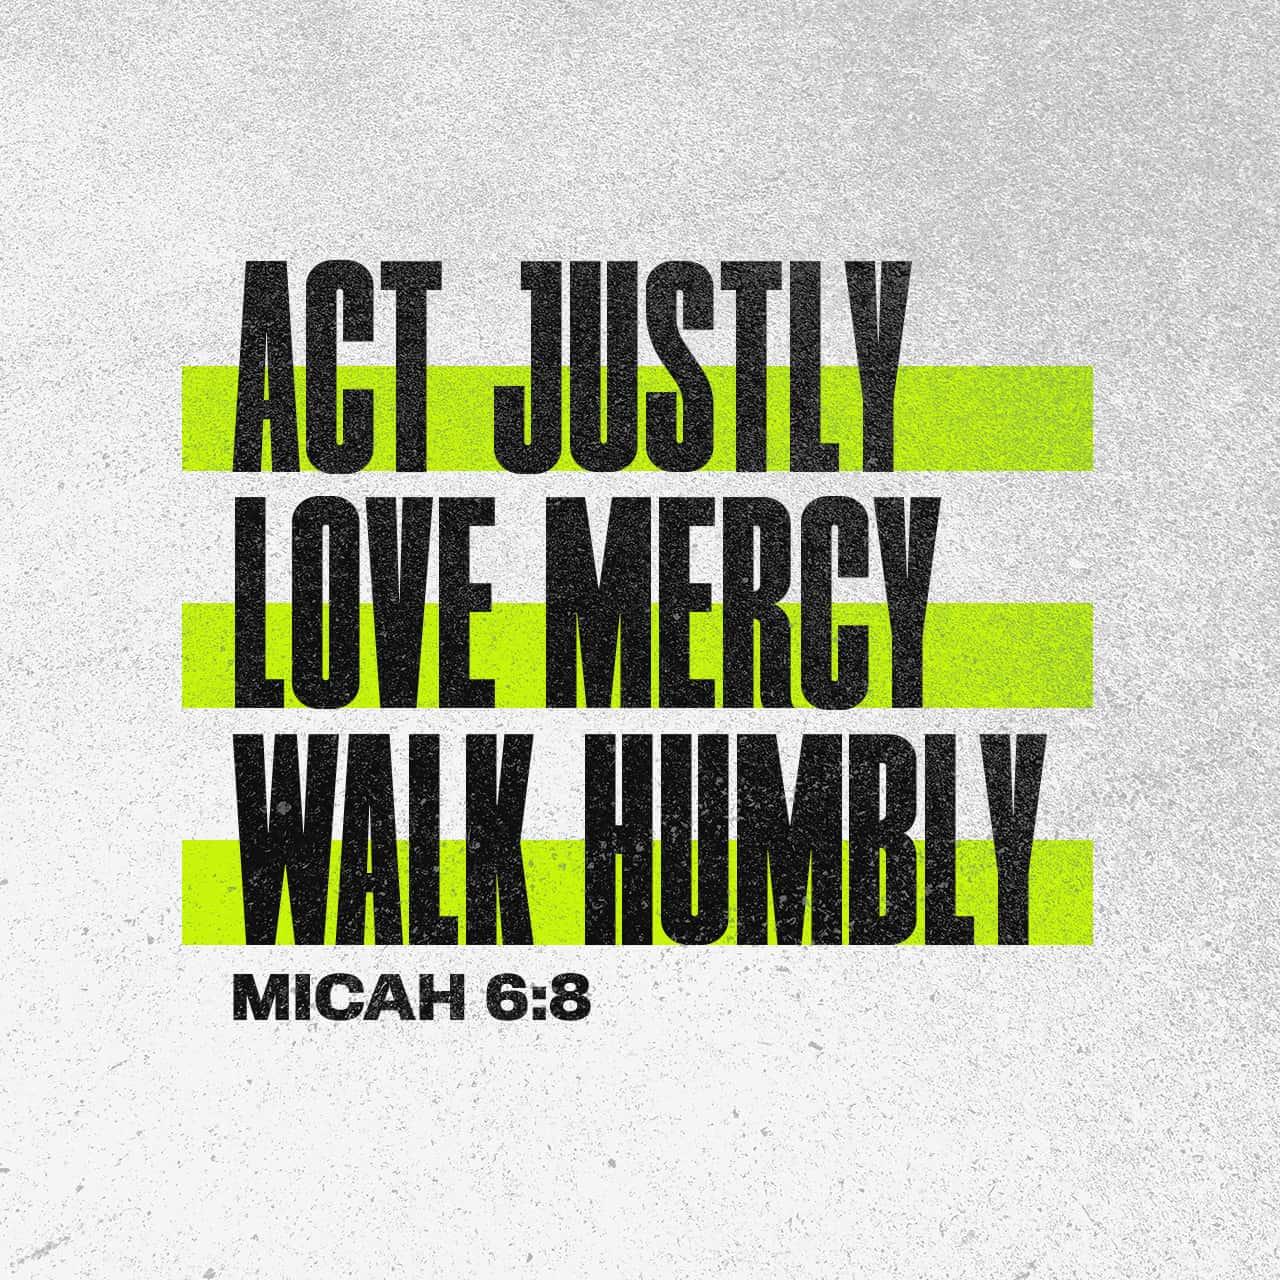 Bible Verse of the Day - day 152 - image 58093 (Micah 6:1-8)